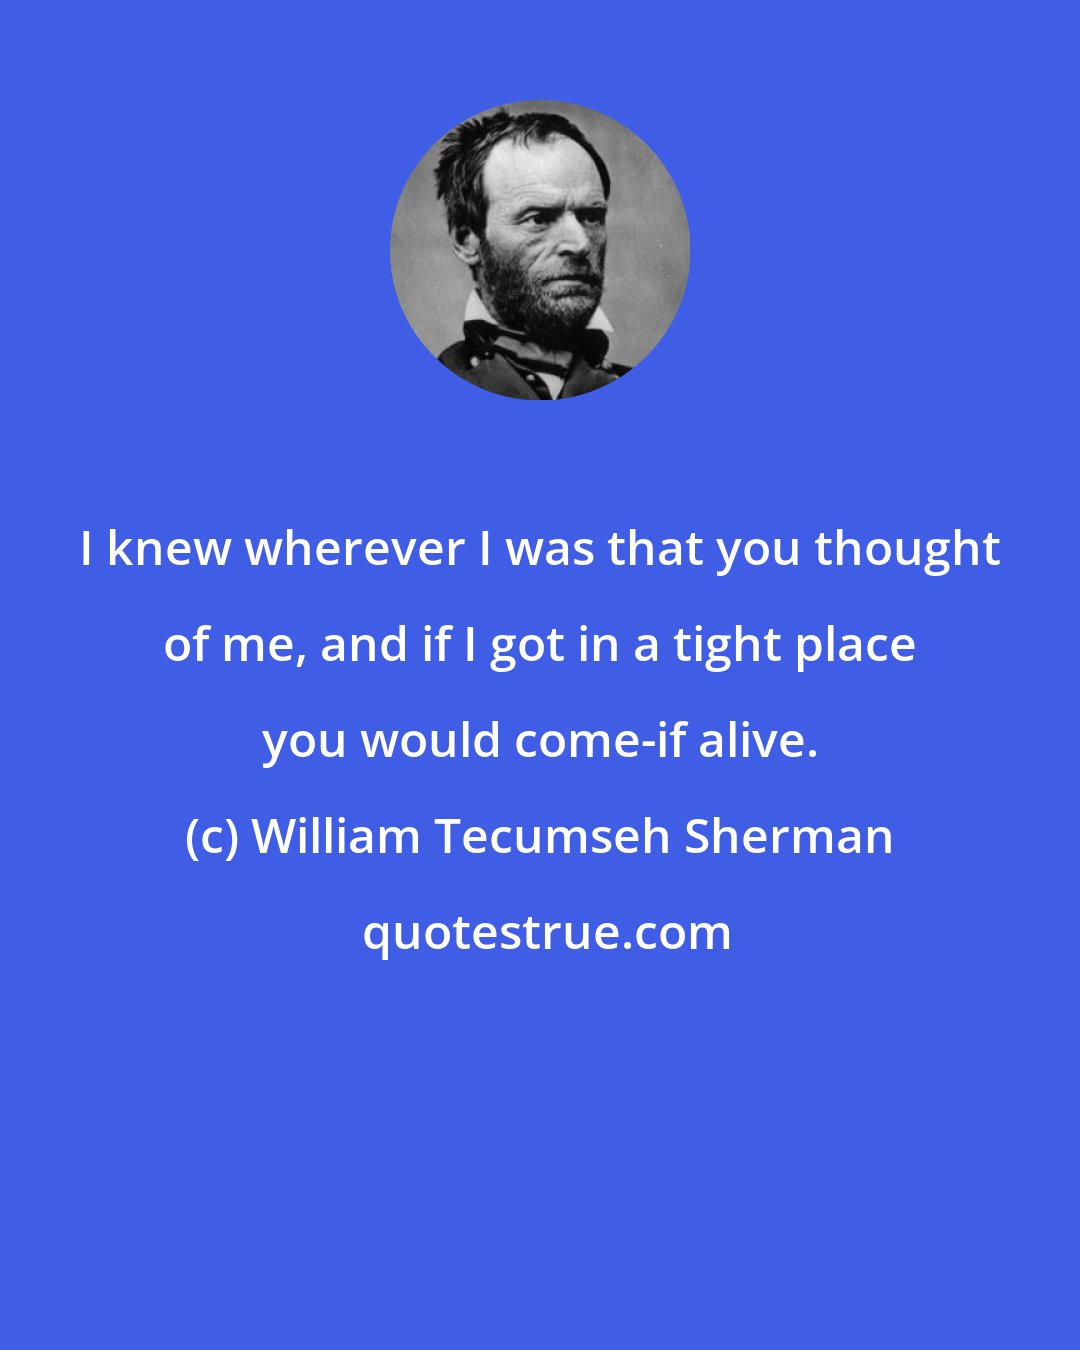 William Tecumseh Sherman: I knew wherever I was that you thought of me, and if I got in a tight place you would come-if alive.